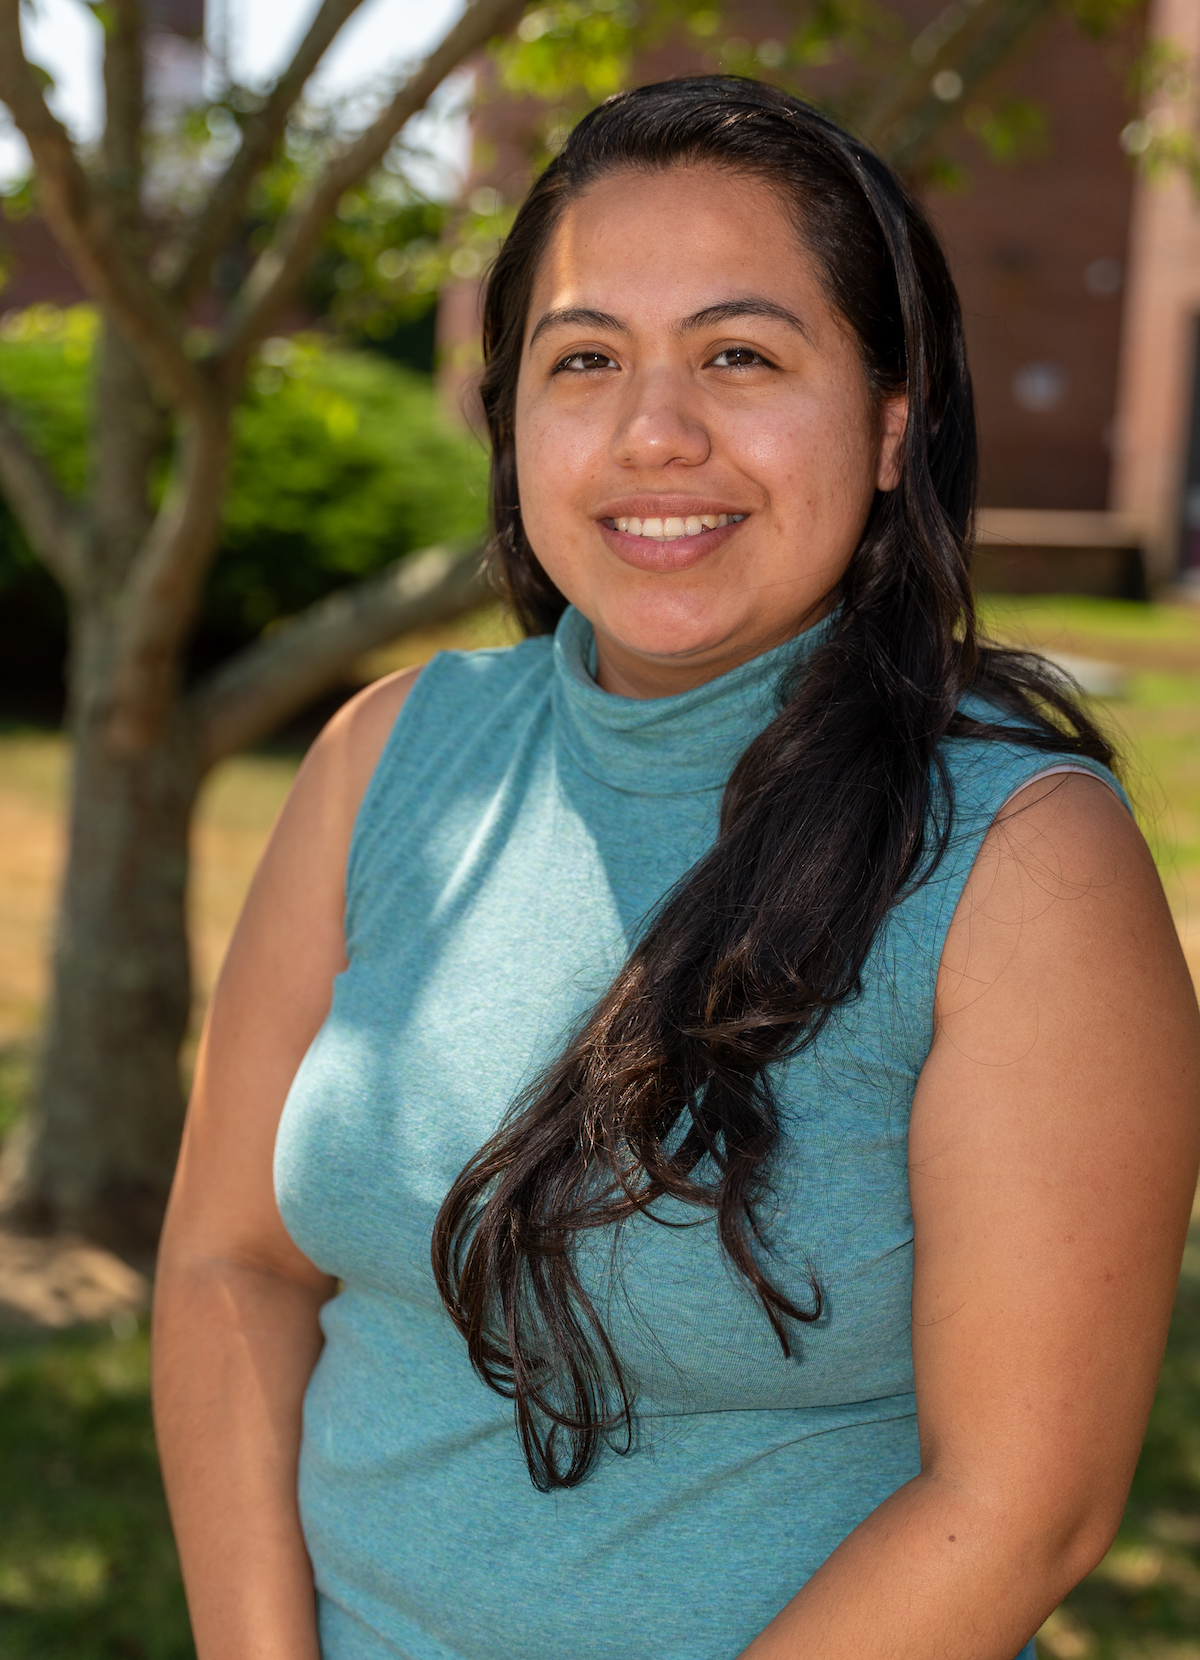 Helen Lopez has been named the new registrar for the Southampton School District.